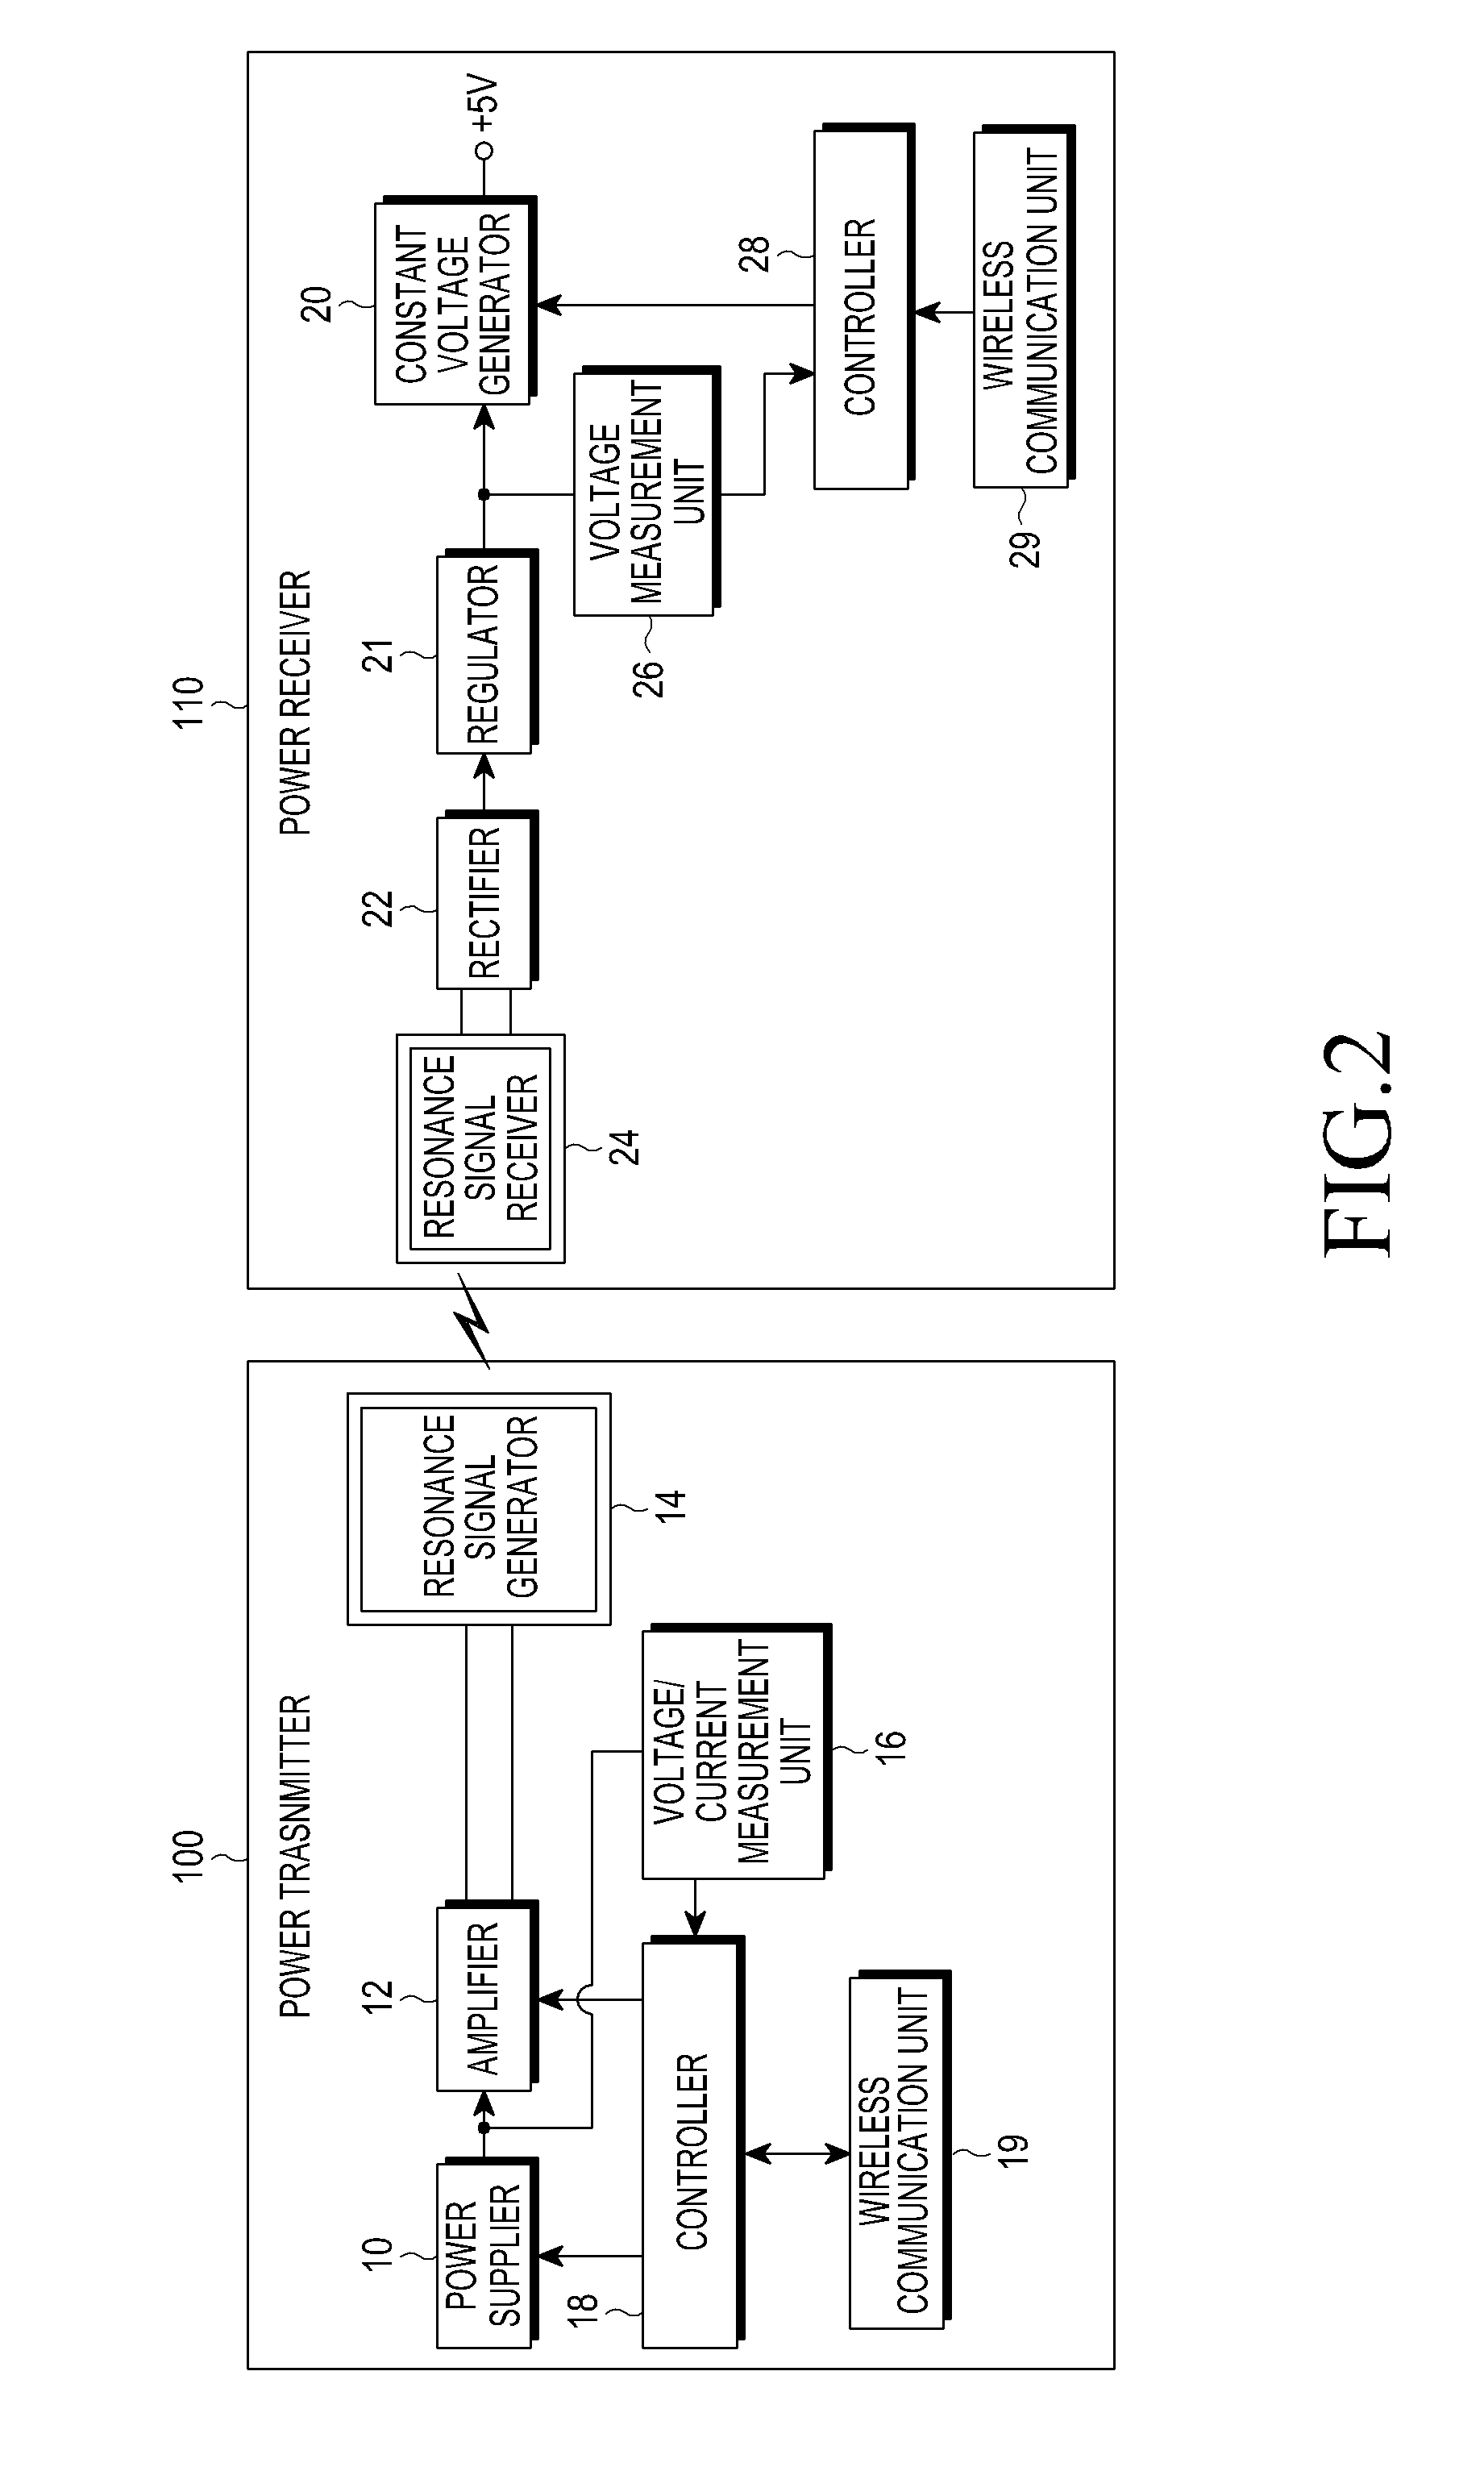 Power transmitting method and power transmitter for communication with power receiver